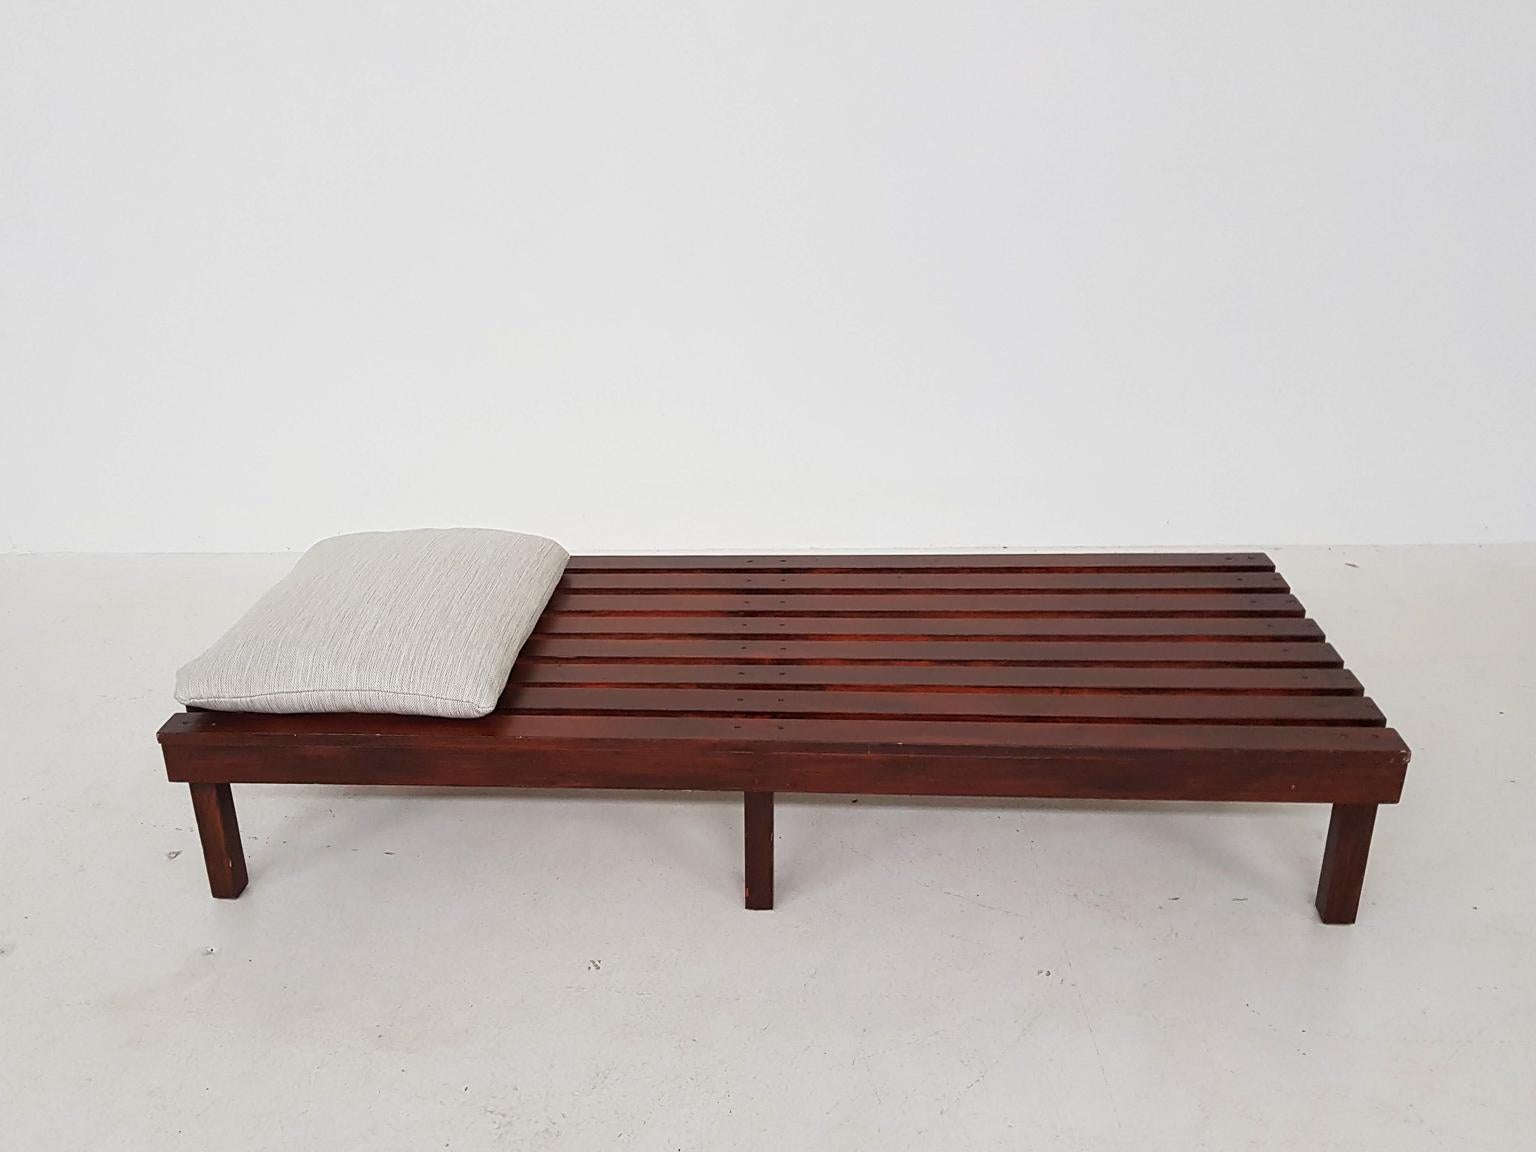 Martin Visser or Charlotte Perriand Style Slat Bench or Daybed, Dutch, 1950s (Minimalistisch)